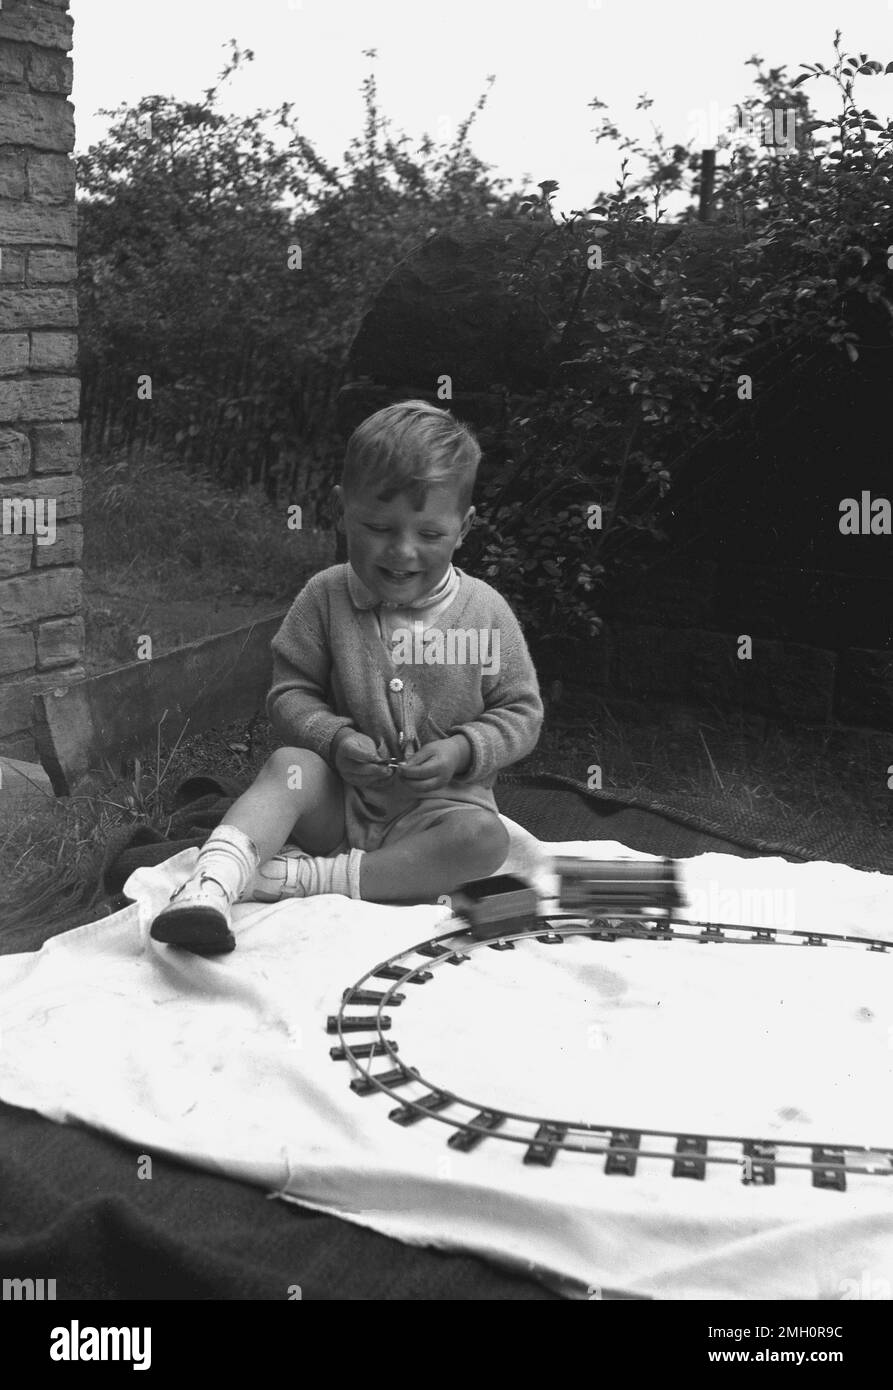 1960s, historical, young boy sitting on a sheet on a rug outside, playing with his train set, England, UK. A toy locomotive on the railtrack pulling a wagon. Stock Photo